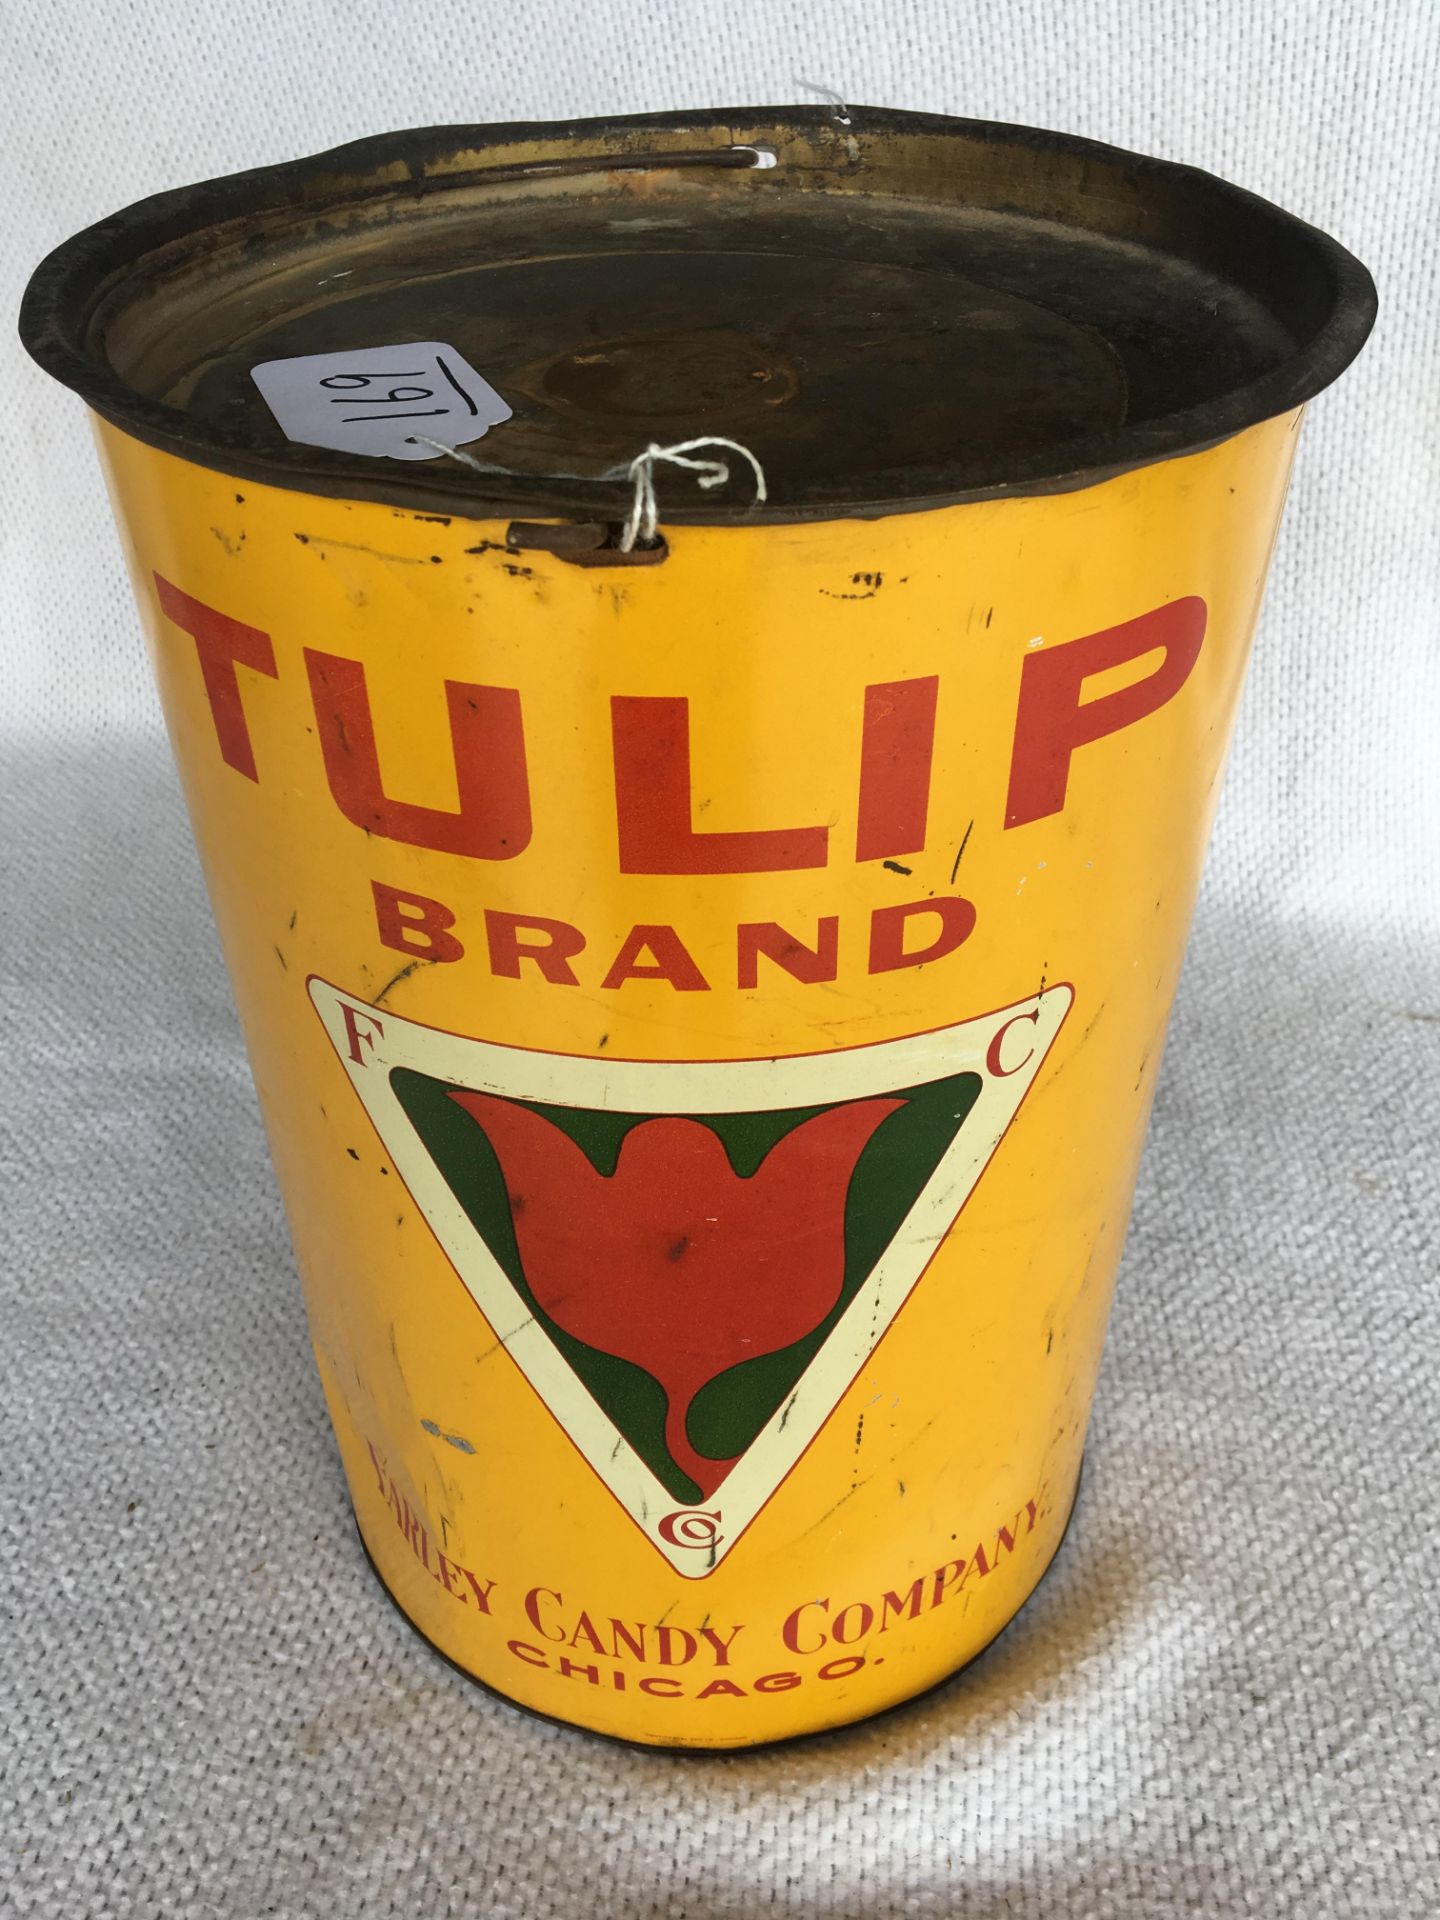 Tulip Brand tin, 15 1/4”, Farley Candy Company – Chicago, IL. - Image 2 of 2